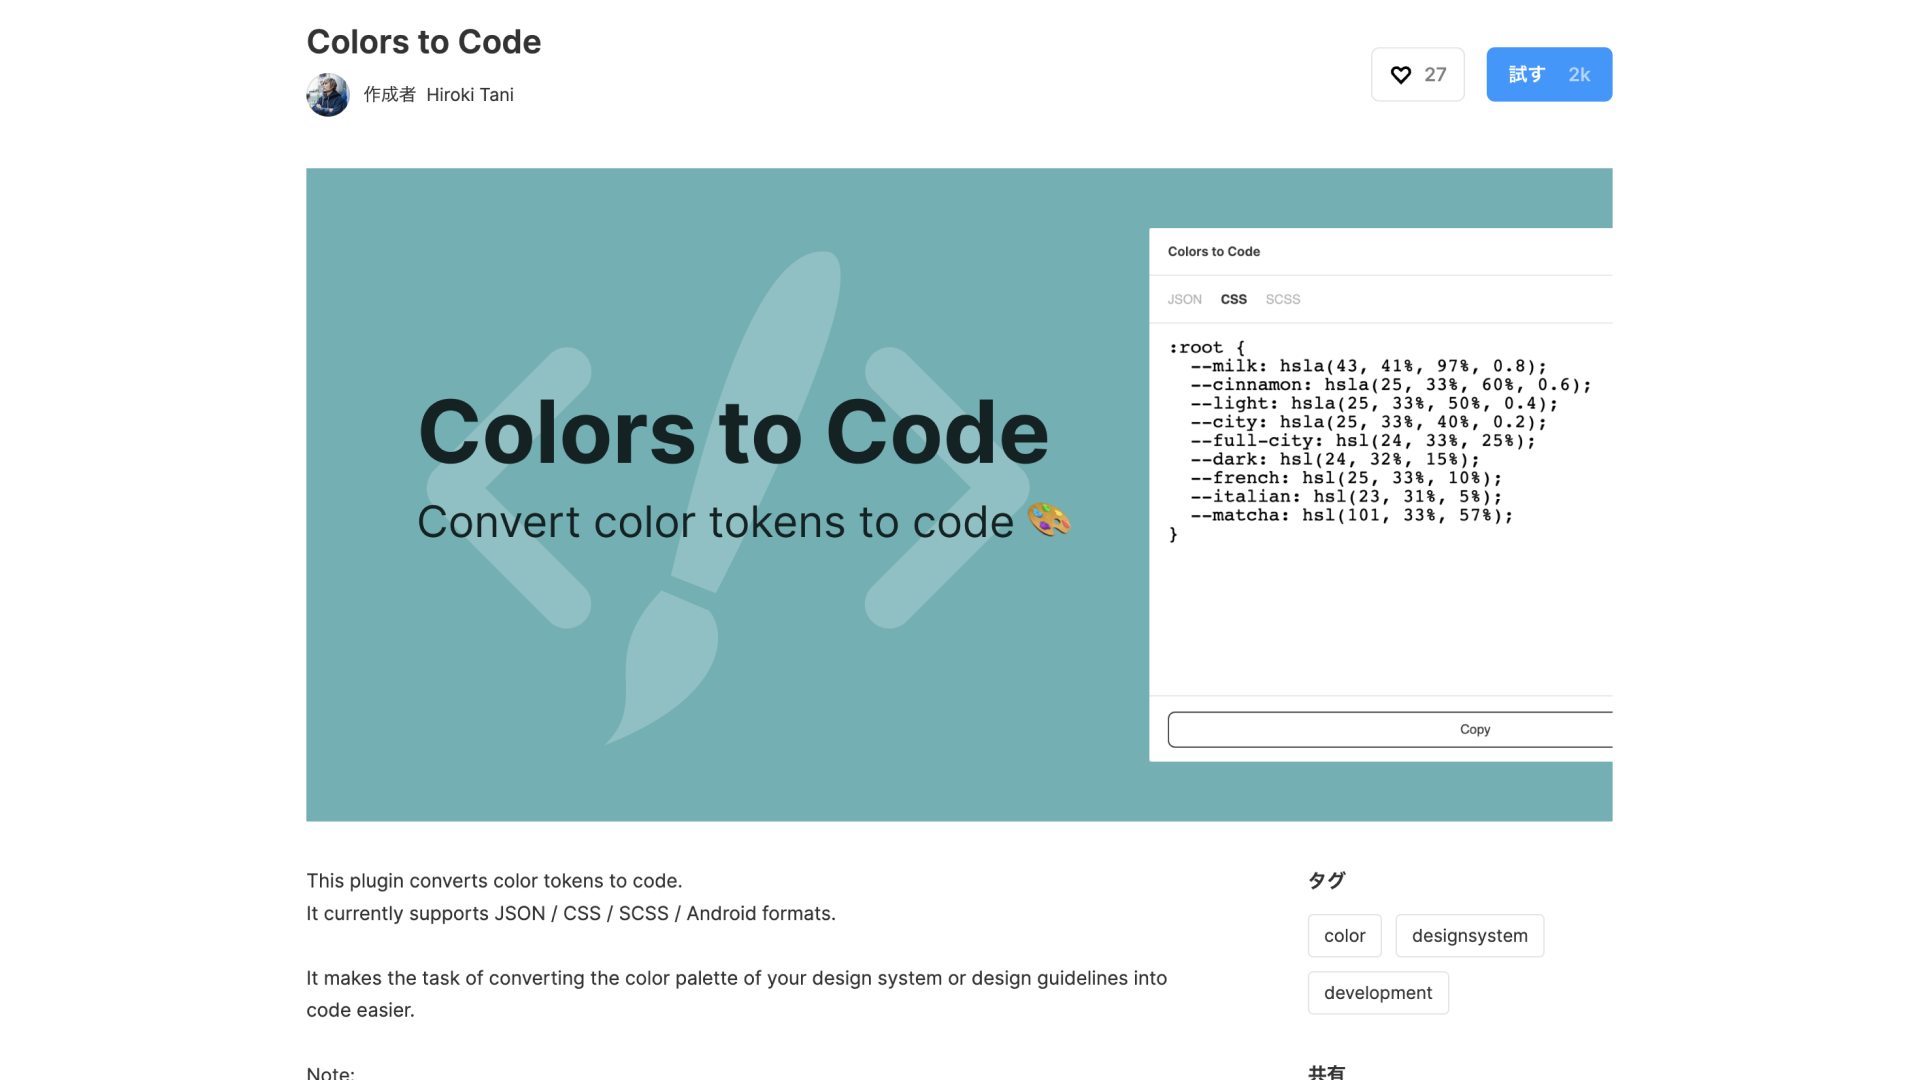 Colors to Code